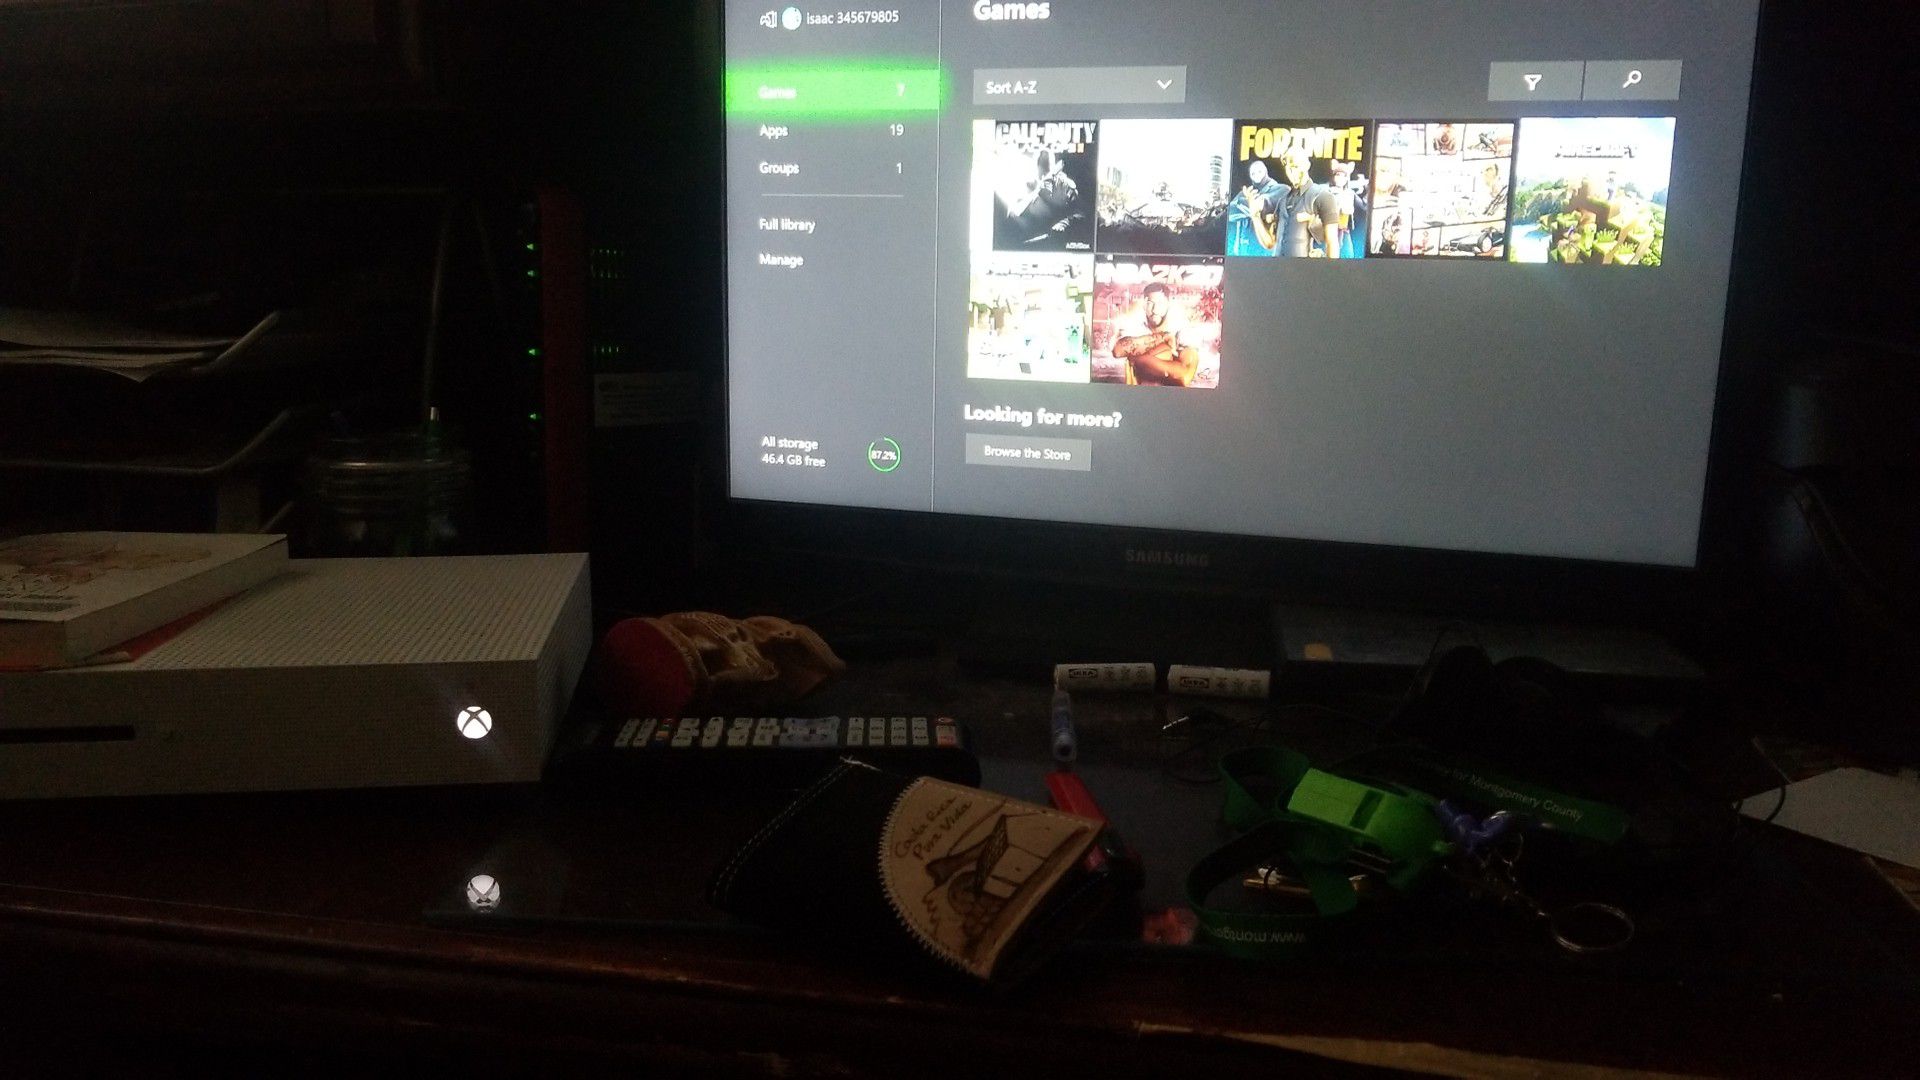 Xbox one x with call of duty ww2 and fifa 17 and minecraft plus 2 wired controllers